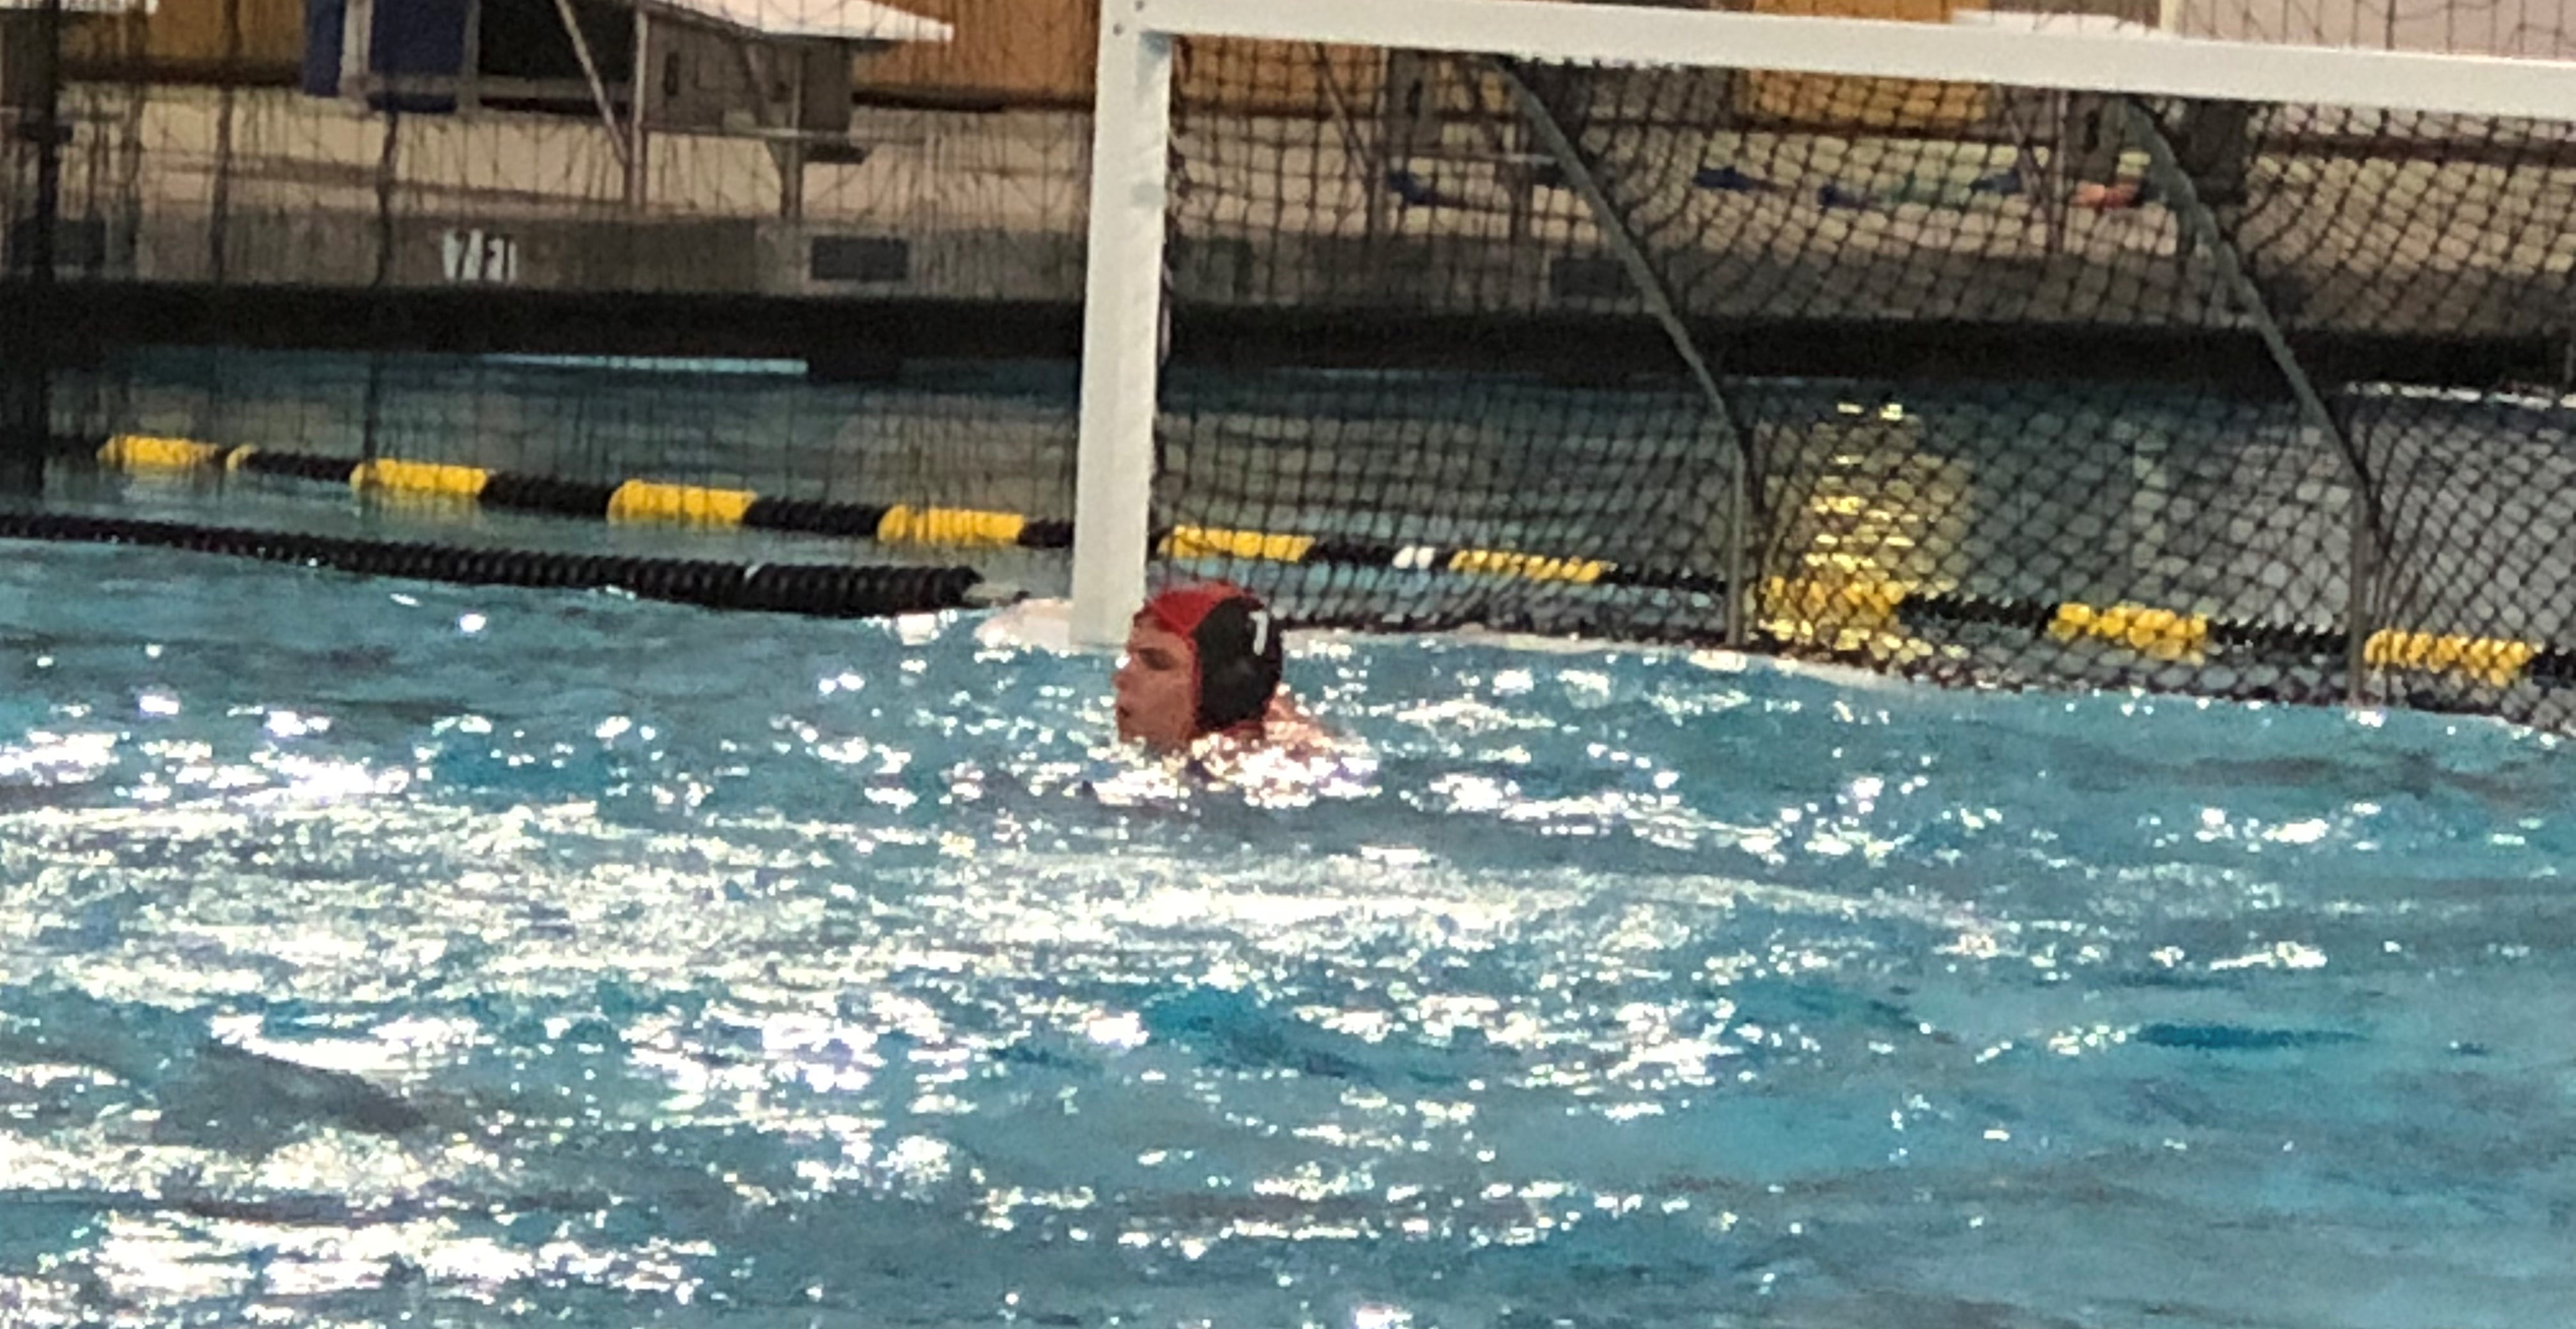 tustin-s-boys-water-polo-team-tops-hillcrest-10-8-in-semifinals-and